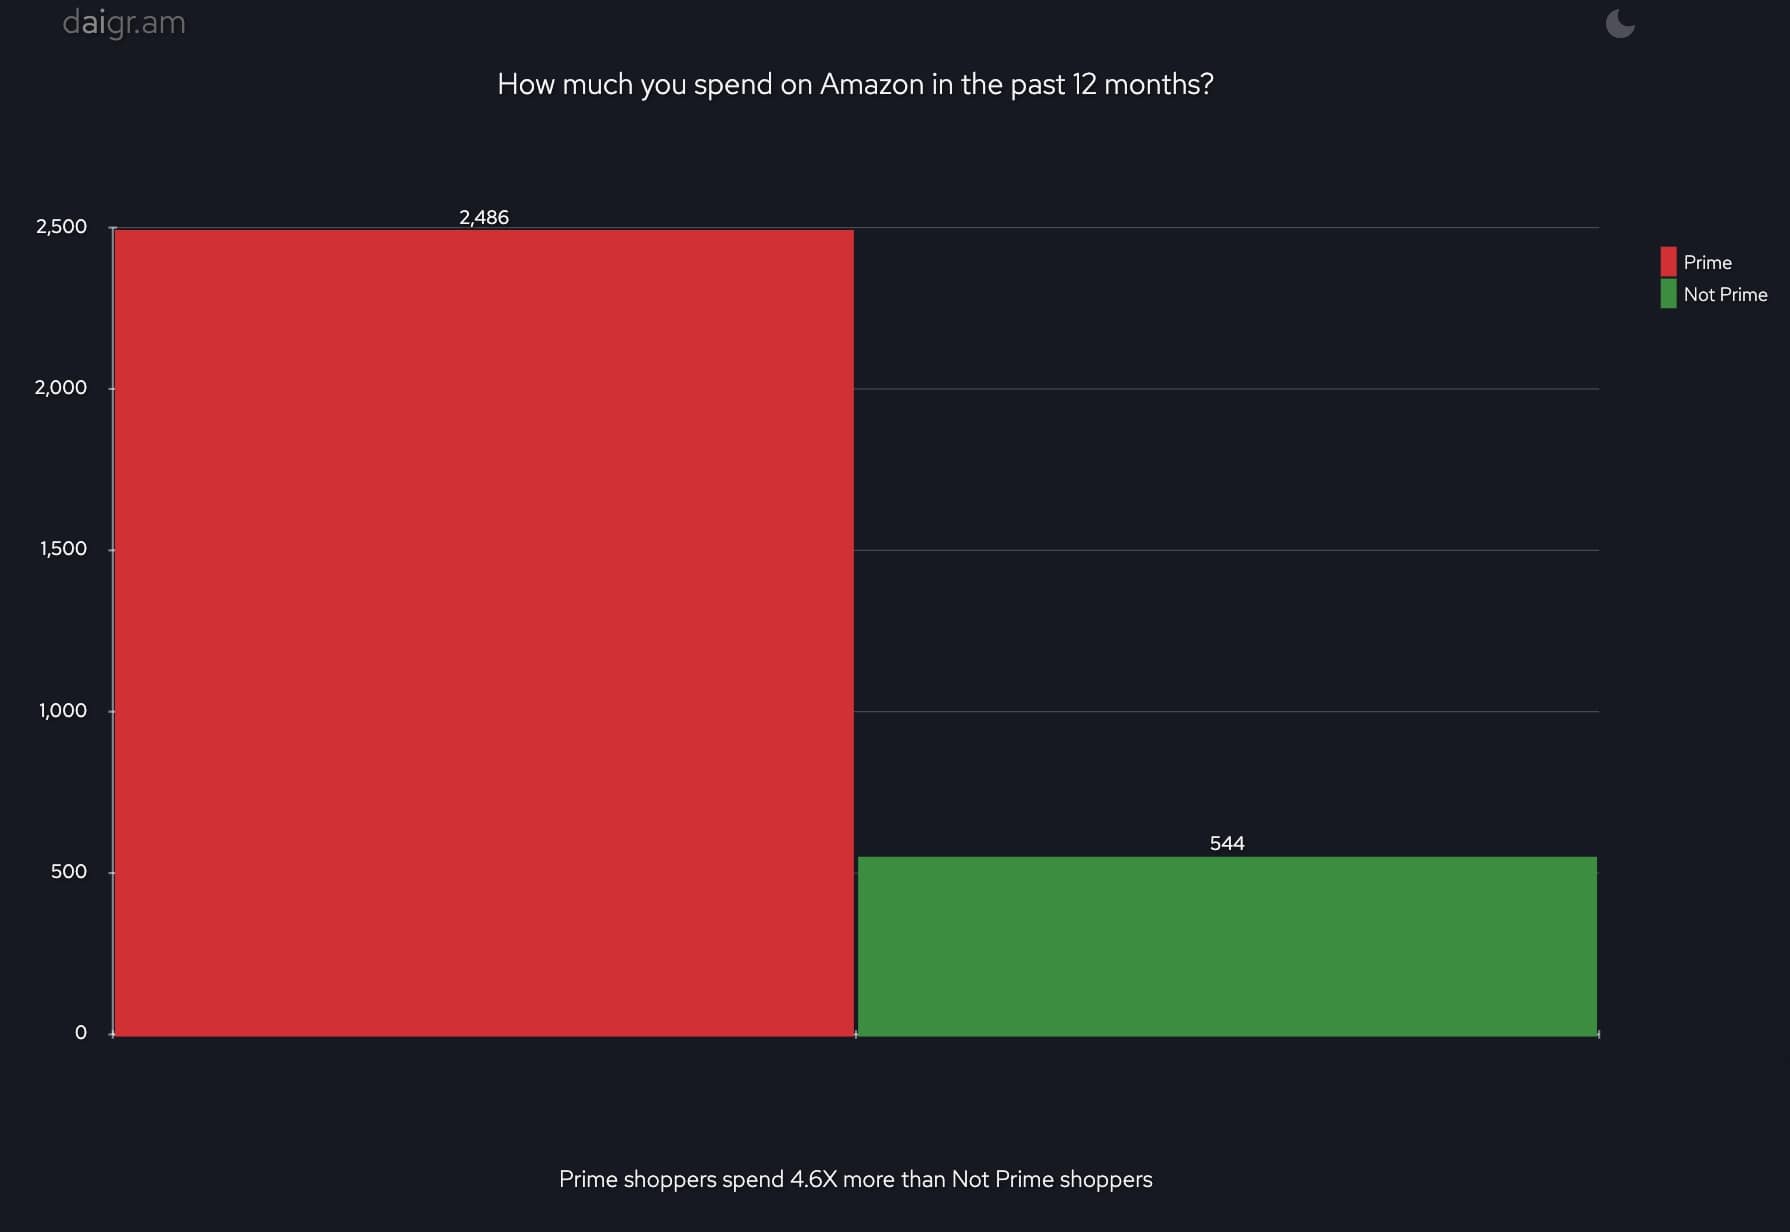 How much you spend on Amazon in past 12 months